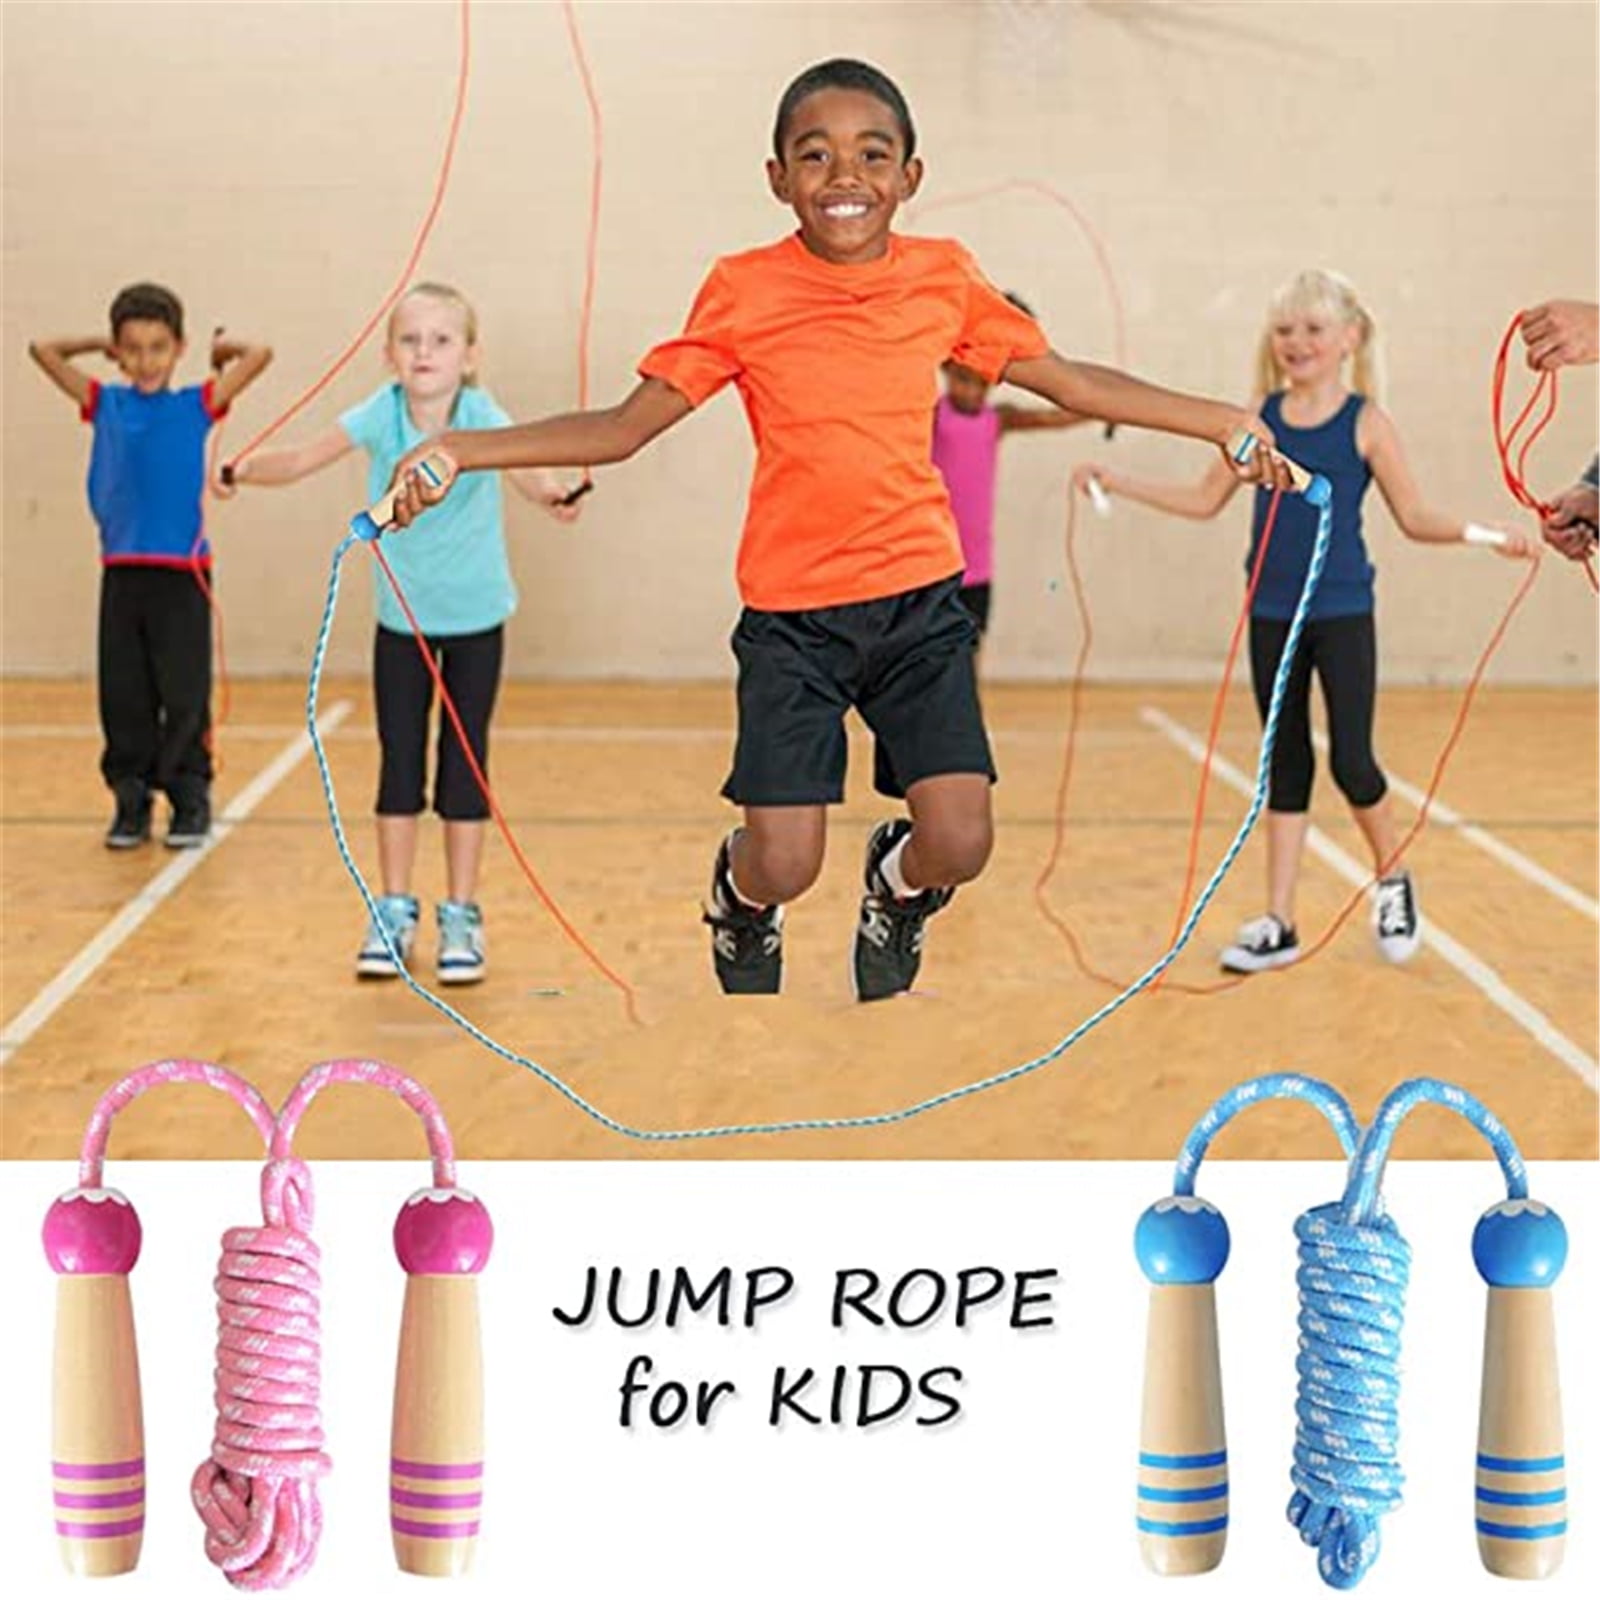 Kids Skipping Rope Children Exercise Jumping Game Fitness Activity PINK 